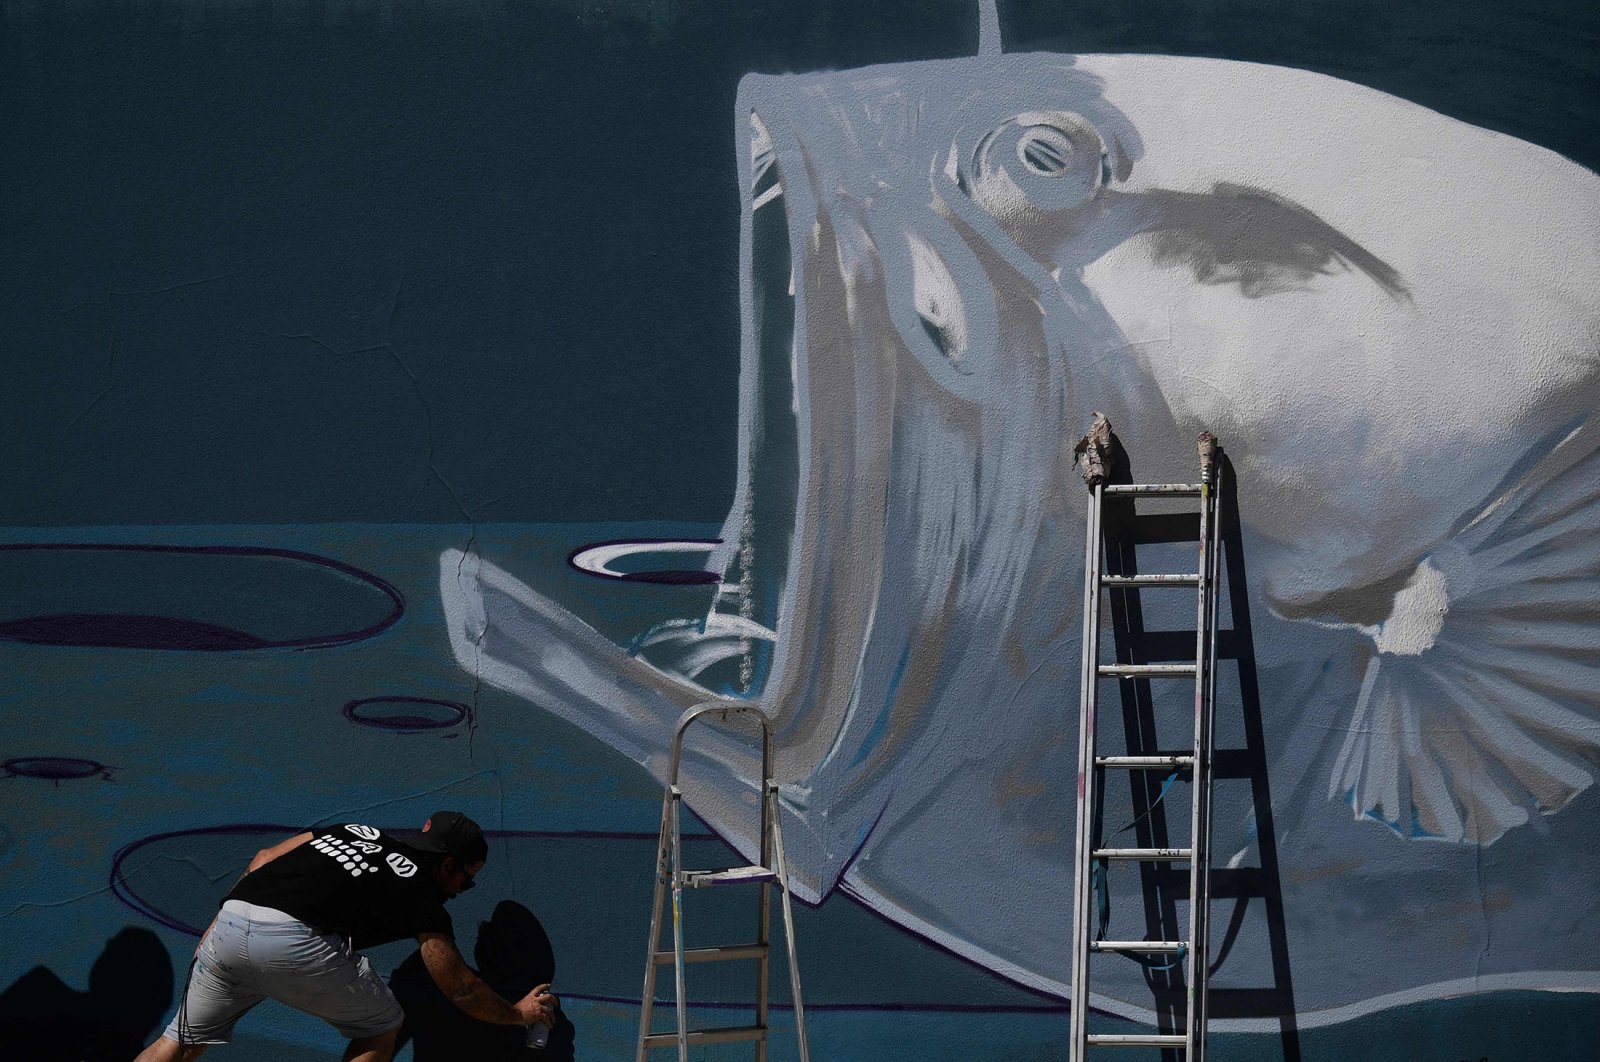 Portuguese graffiti and visual artist Goncalo Mar works on a mural symbolizing the defense of the deep ocean, in Lisbon, Portugal, July 1, 2022. (AFP Photo)